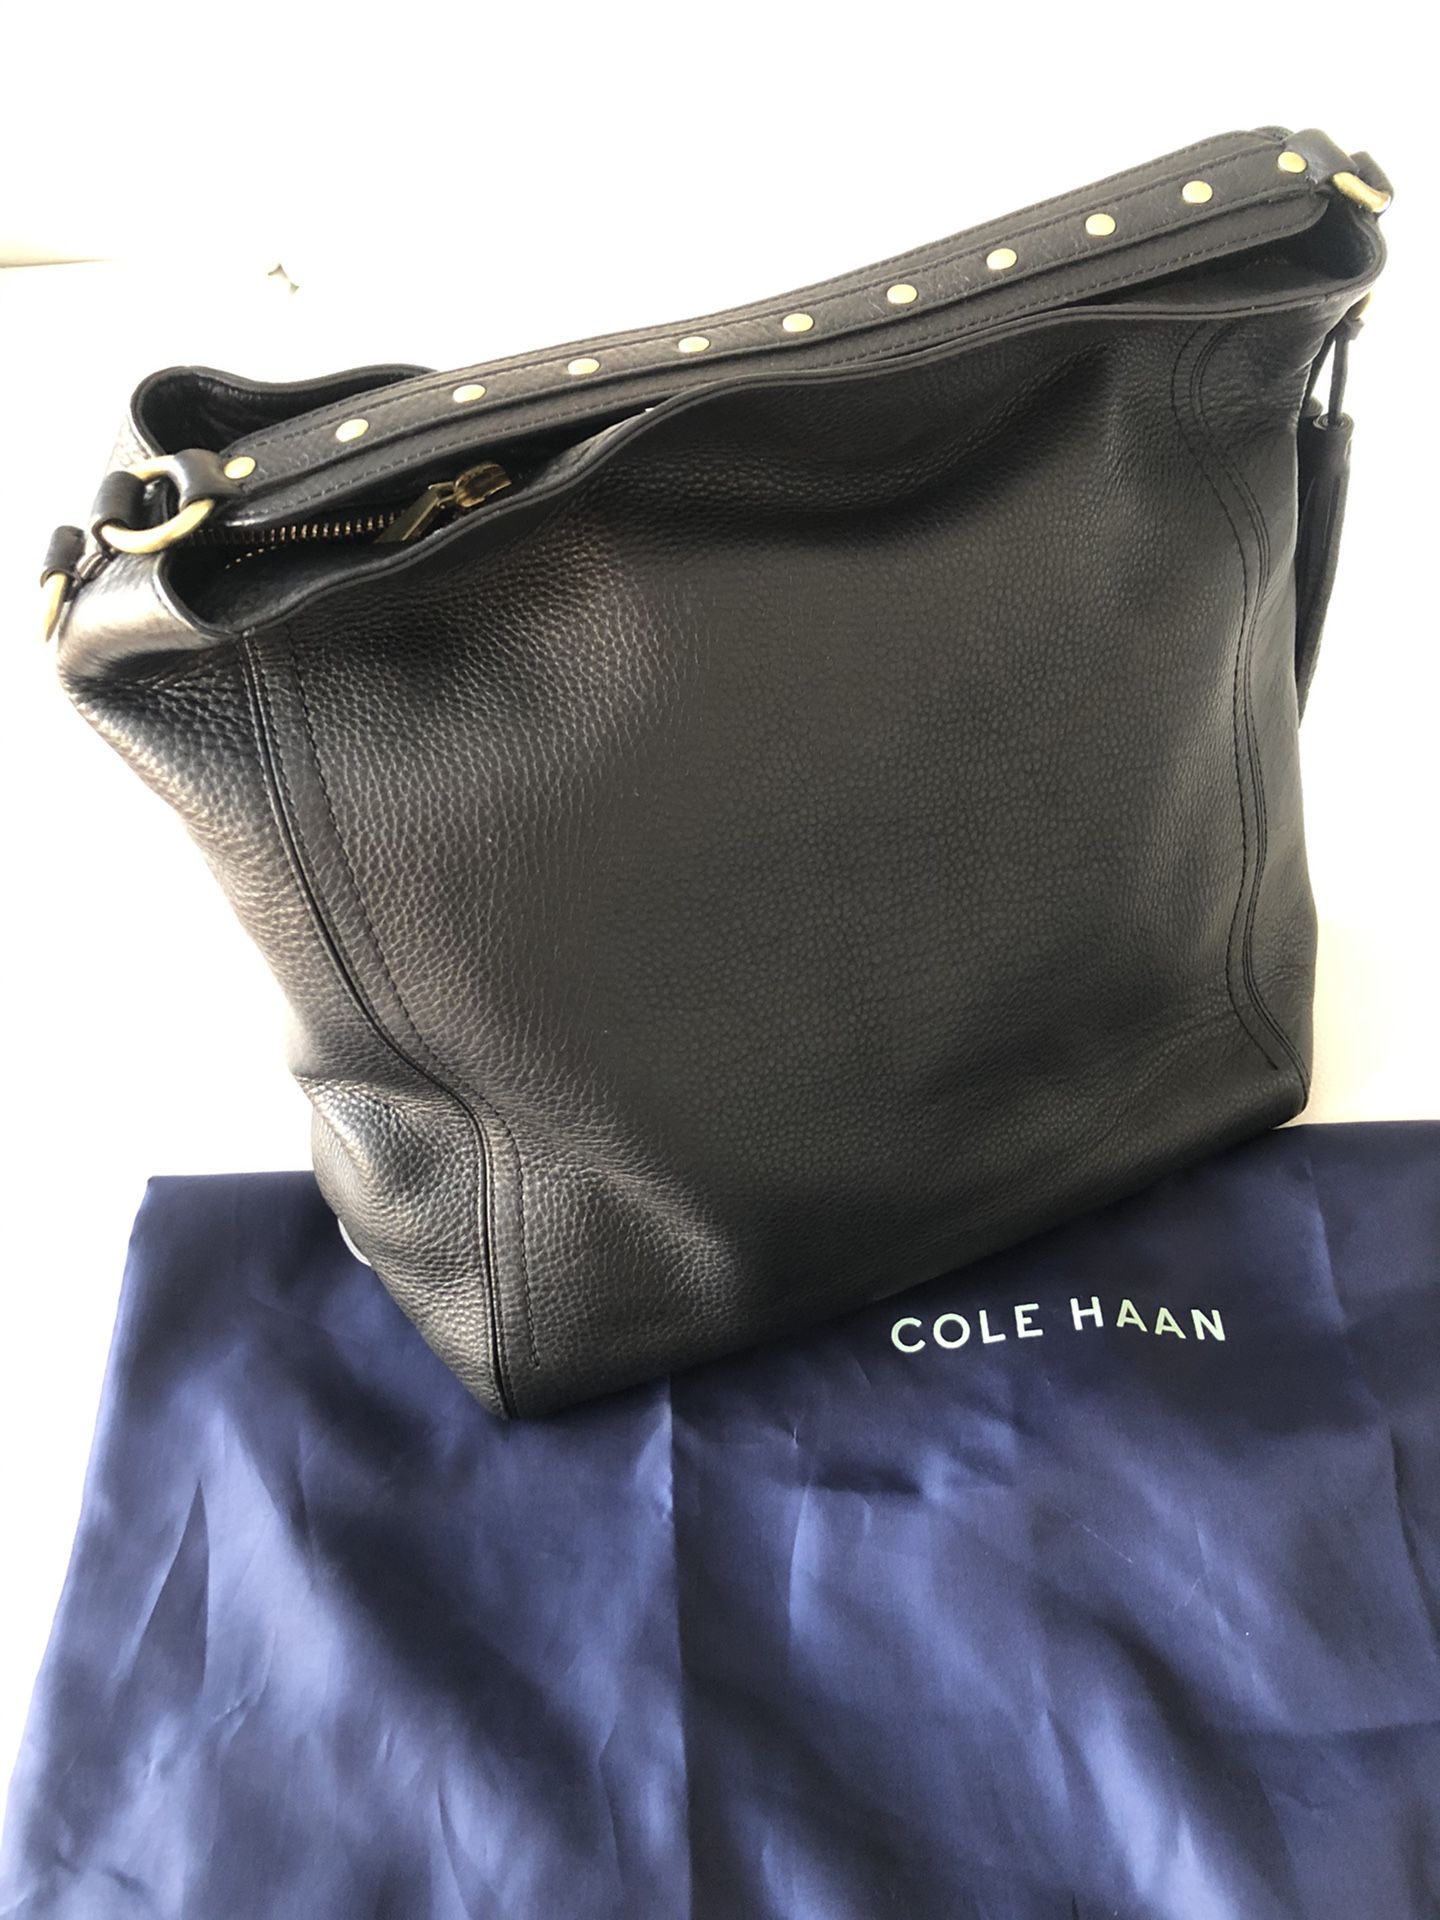 Cole Haan hobo bag! Excellent condition